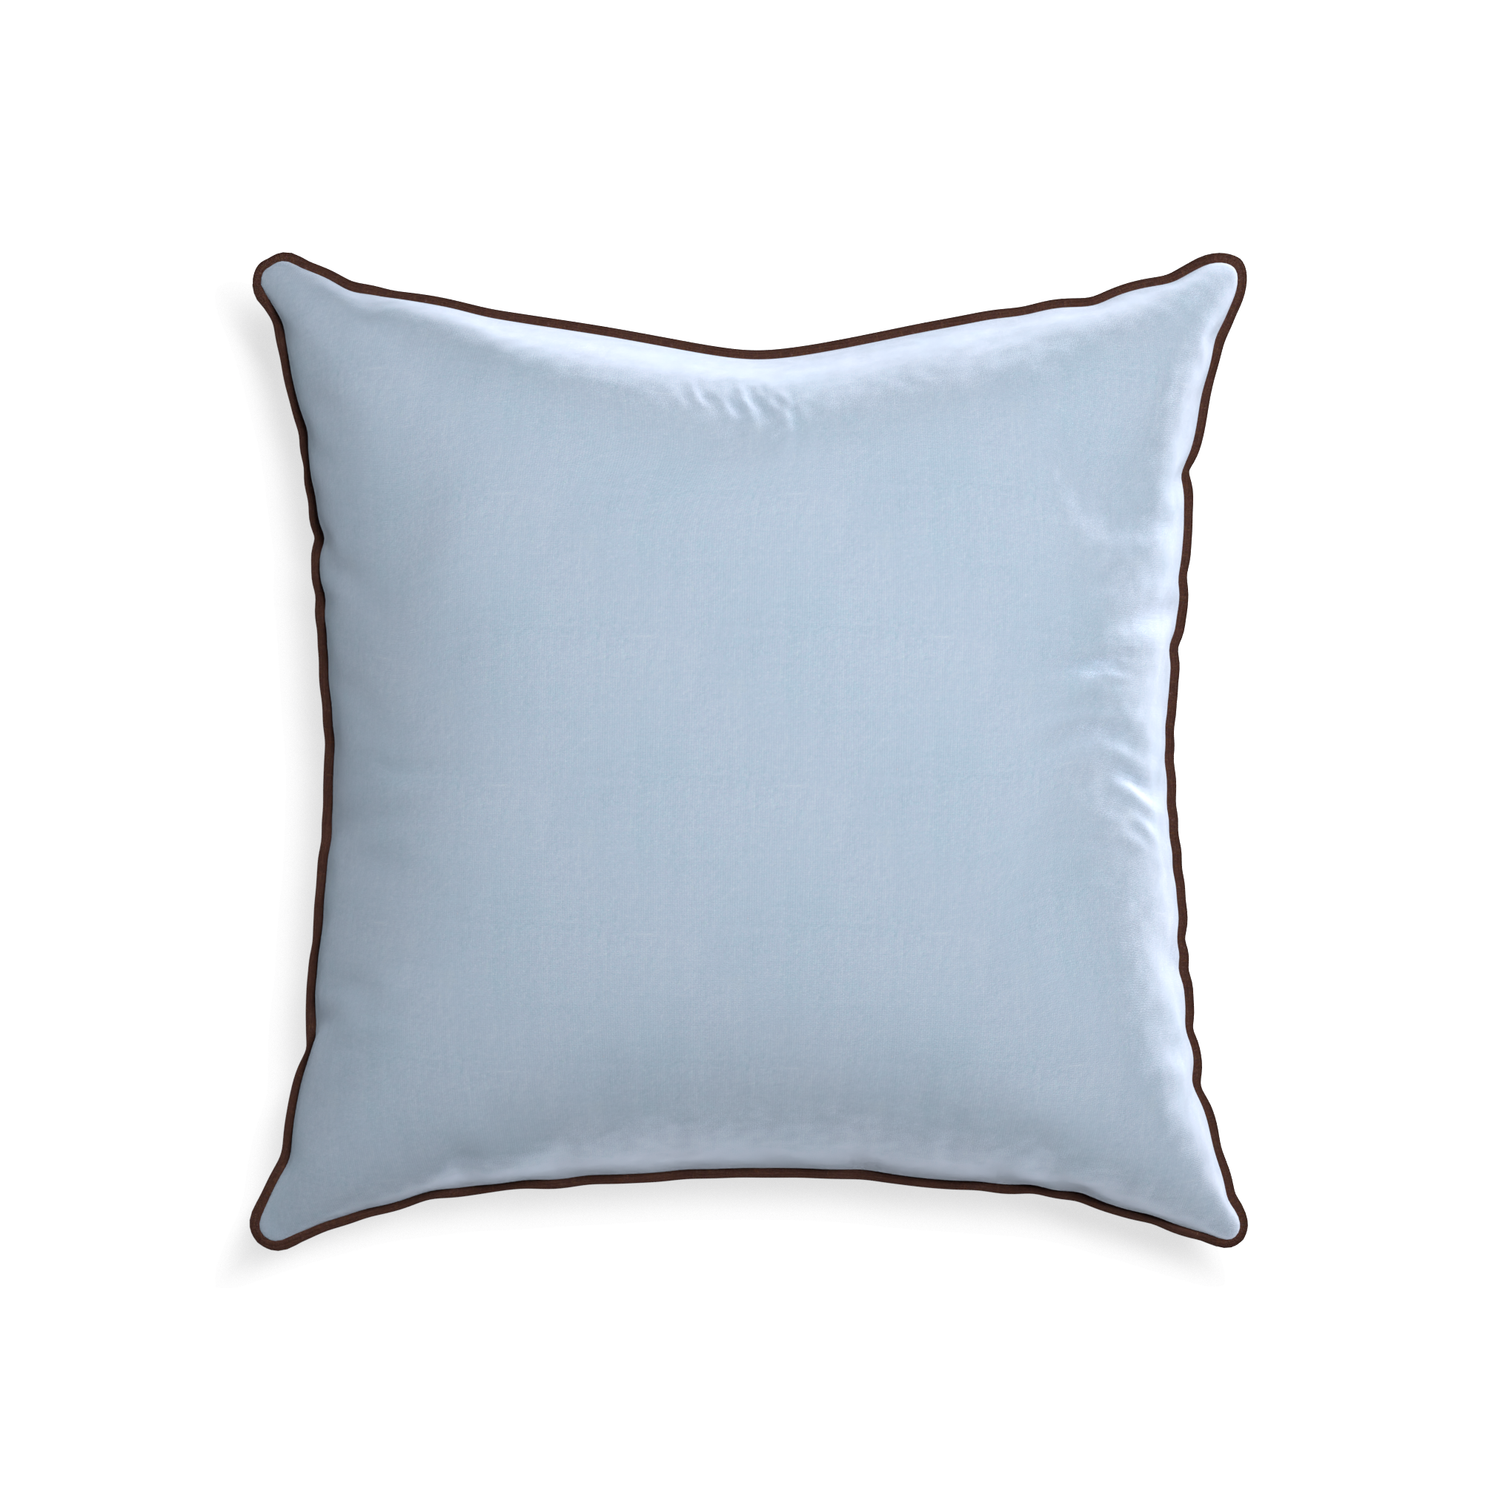 22-square sky velvet custom pillow with w piping on white background